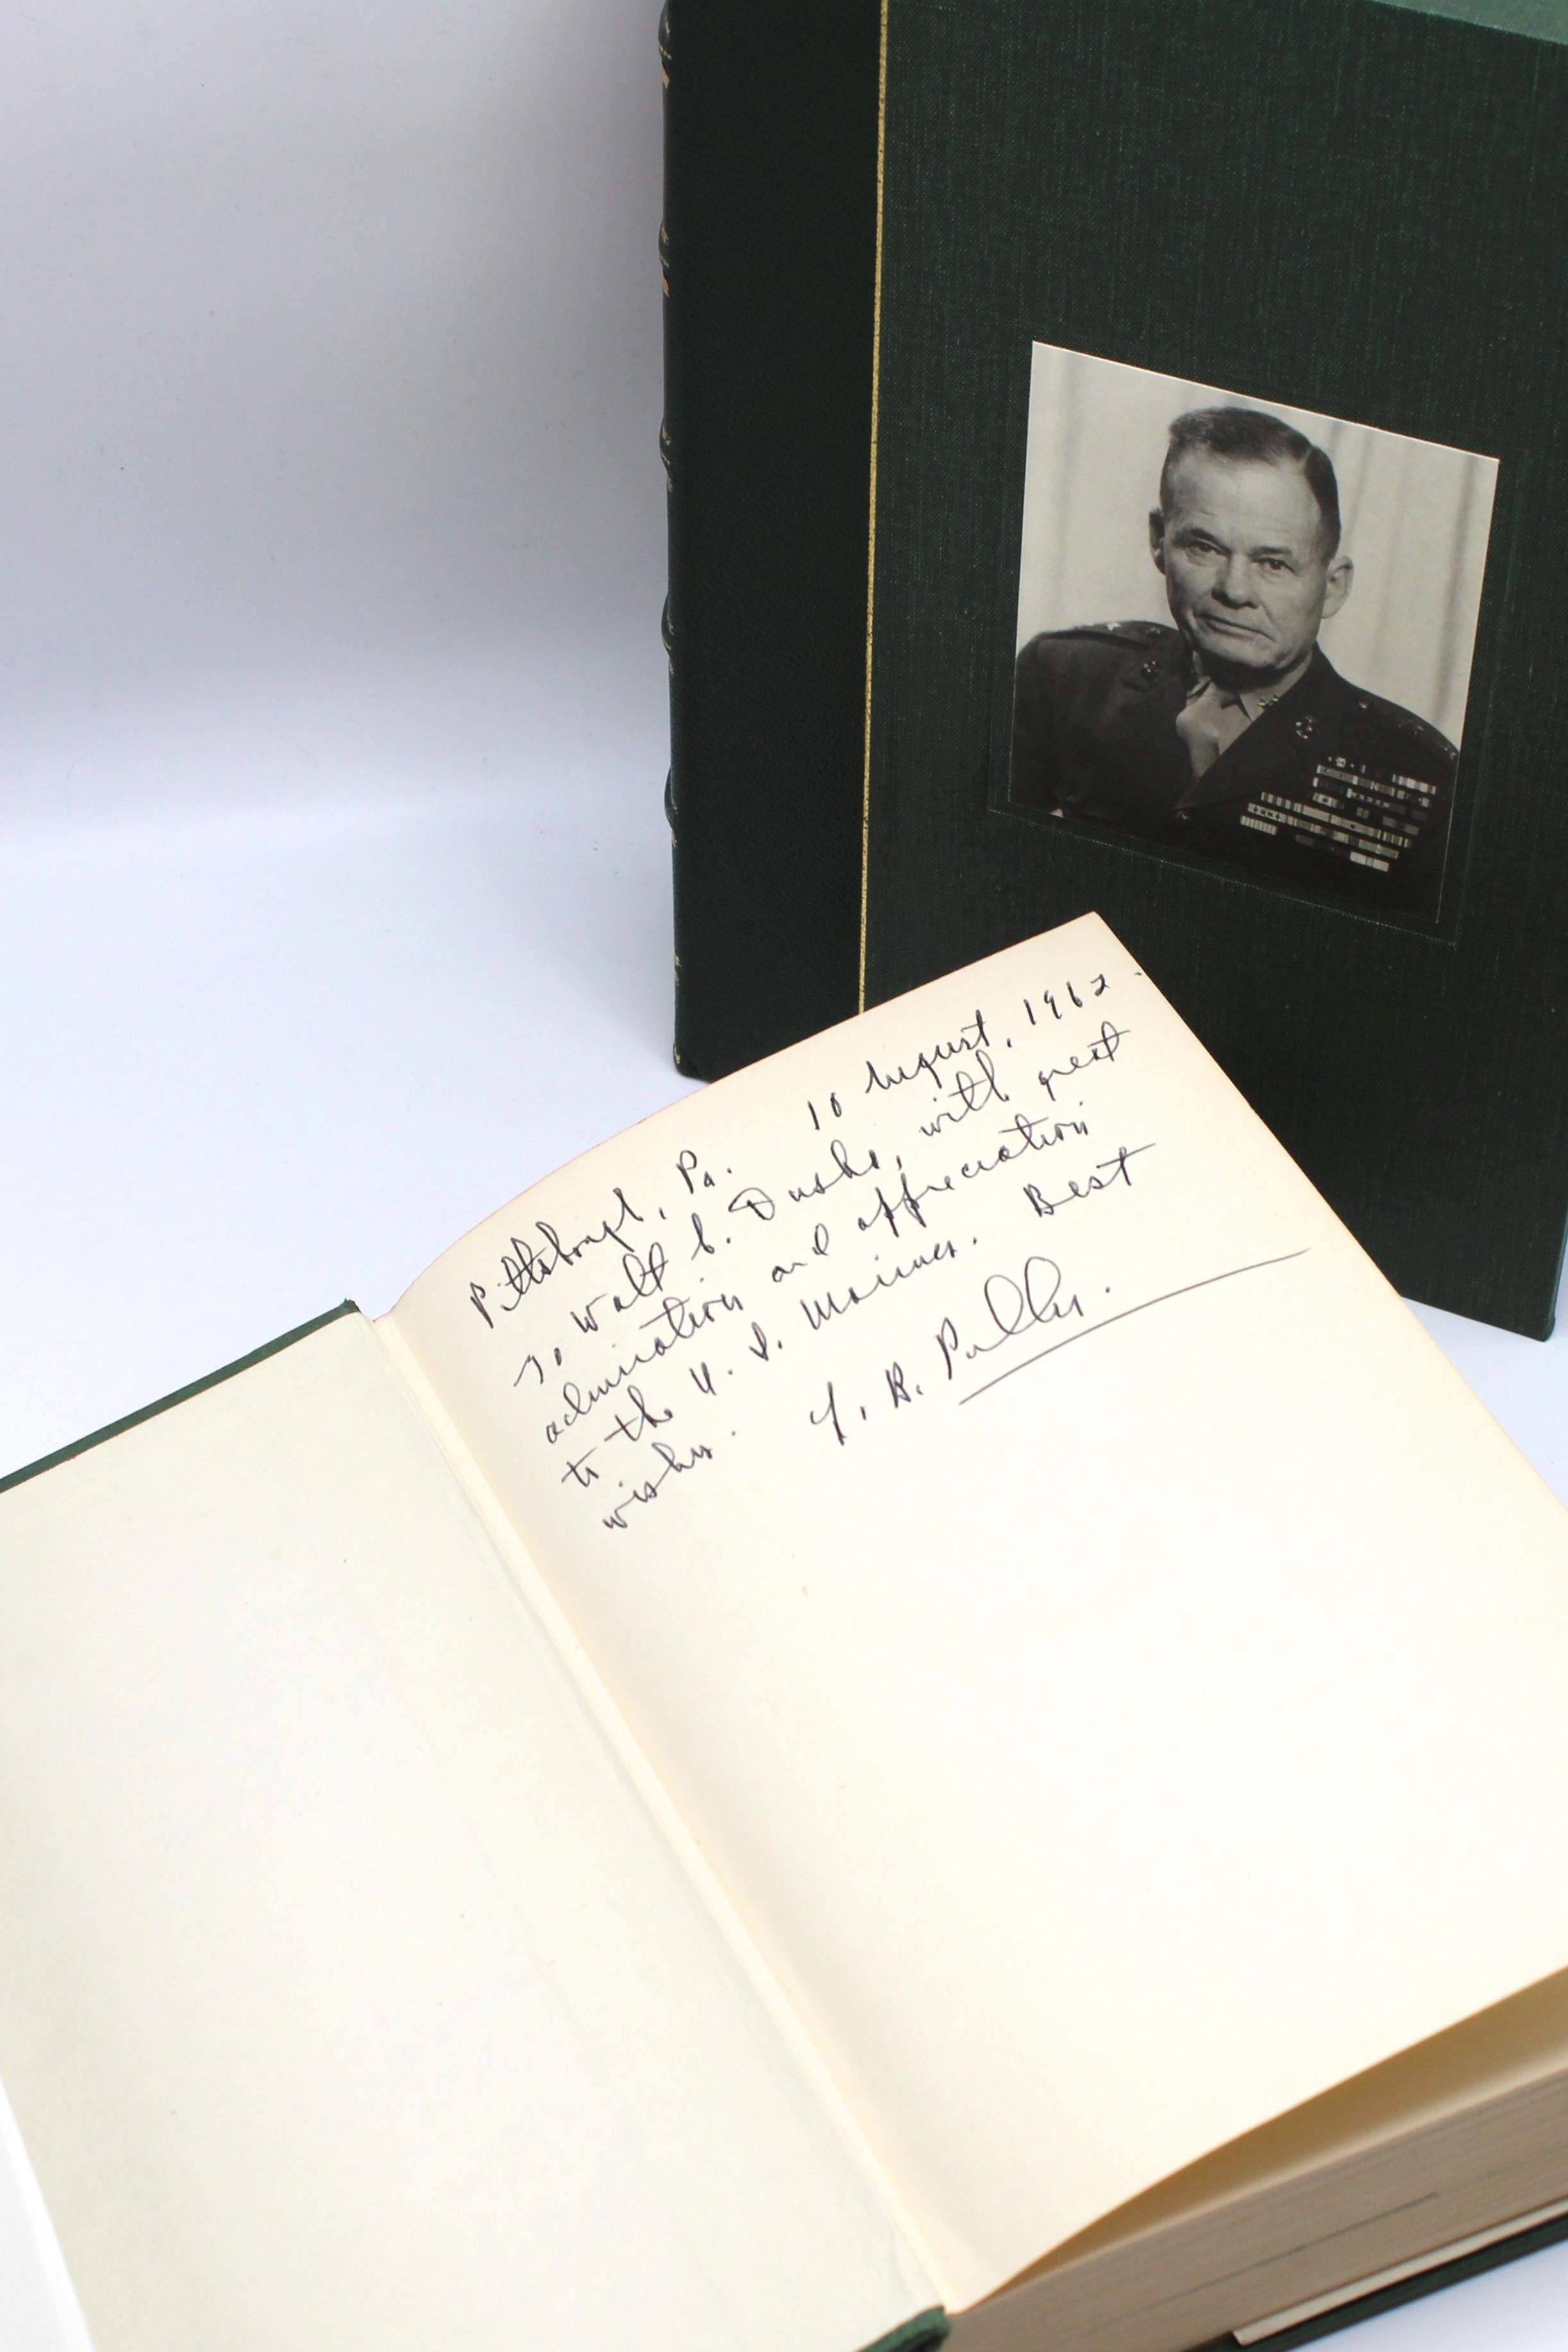 Davis, Burke. Marine! The Life of Chesty Puller. Boston and Toronto: Little brown and Co. 1962. First edition signed and inscribed by “Chesty” Puller.

This first edition of Burke Davis’ biography of Lewis B. (Chesty) Puller is signed and